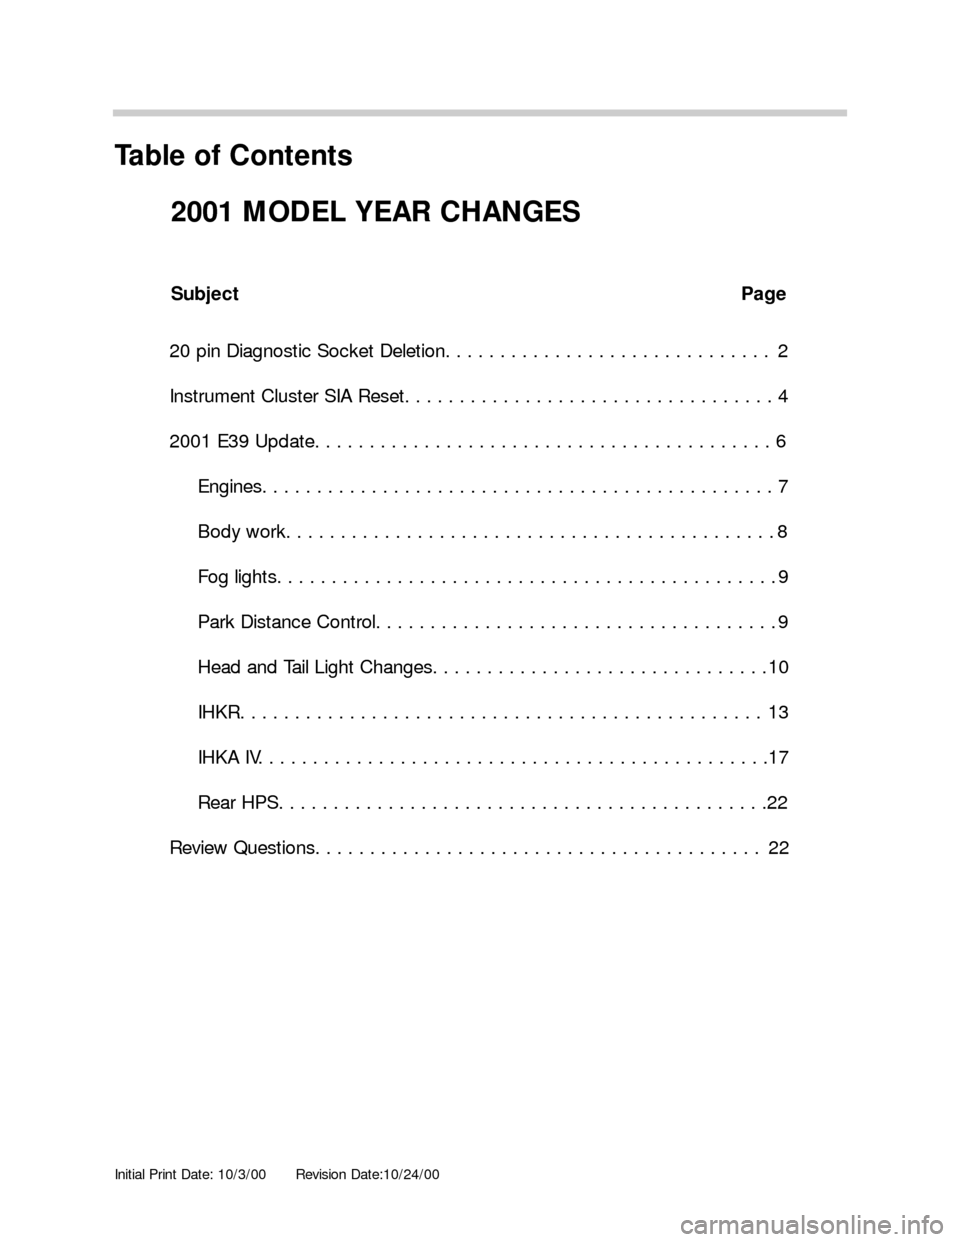 BMW 3 SERIES 2003 E46 Model Yar Changes Initial Print Date: 10/3/00Revision Date:10/24/00
Subject Page
20 pin Diagnostic Socket Deletion. . . . . . . . . . . . . . . . . . . . . . . . . . . . . . 2
Instrument Cluster SIA Reset. . . . . . . 